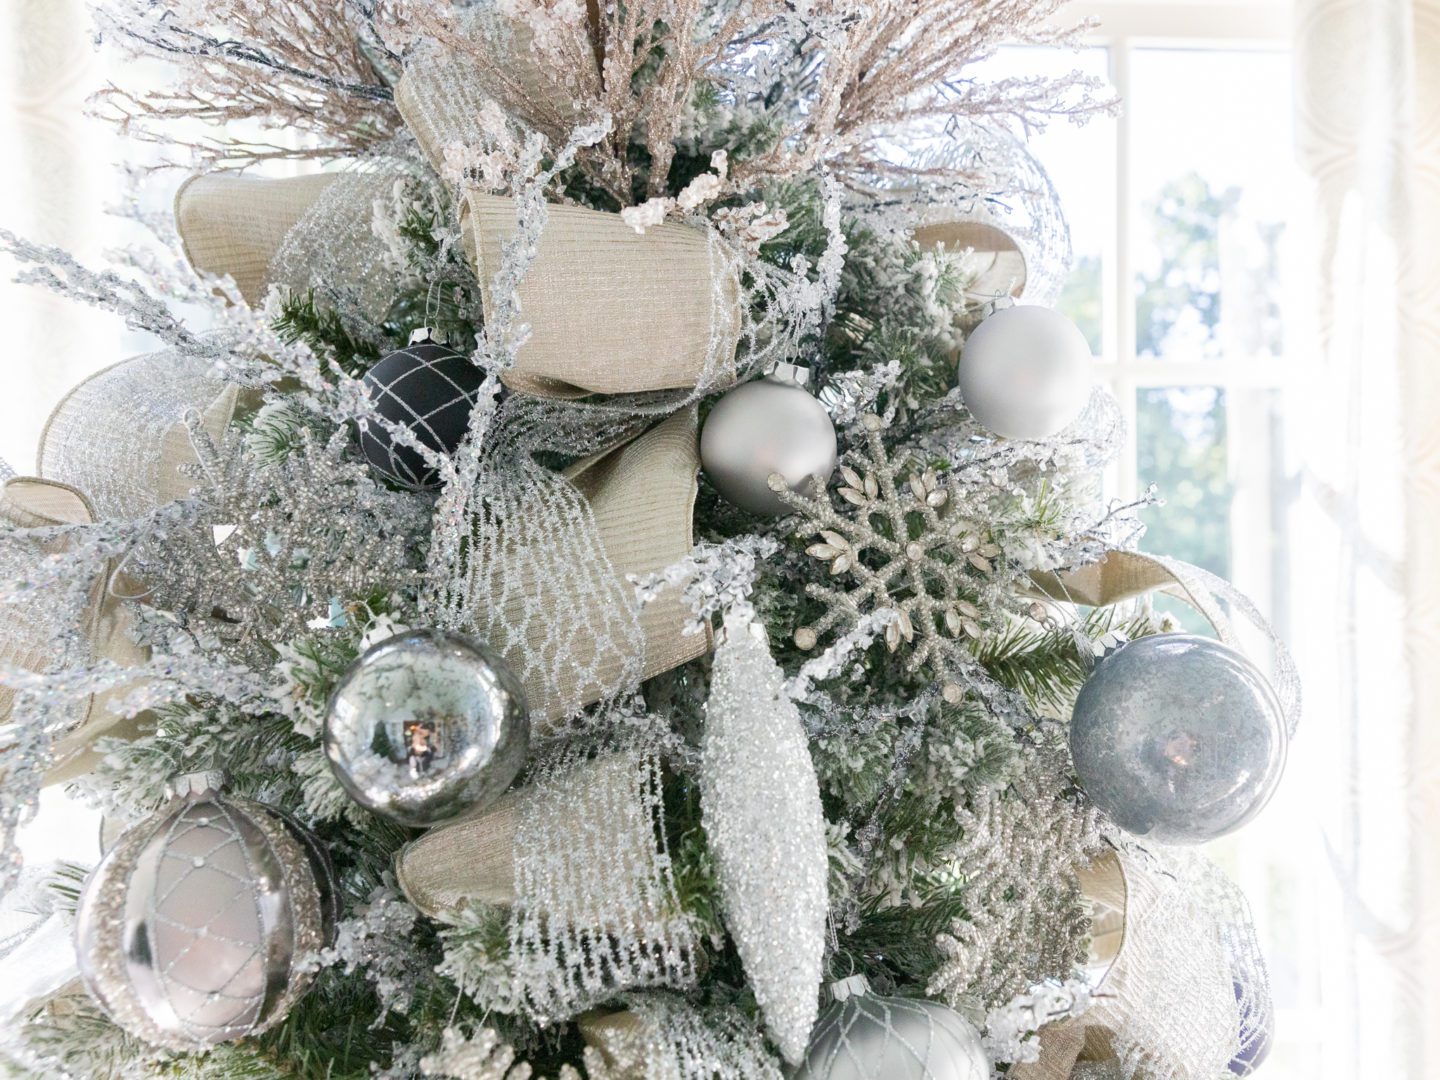 Mesh and silver ribbon on a flocked Christmas tree with silver ornaments